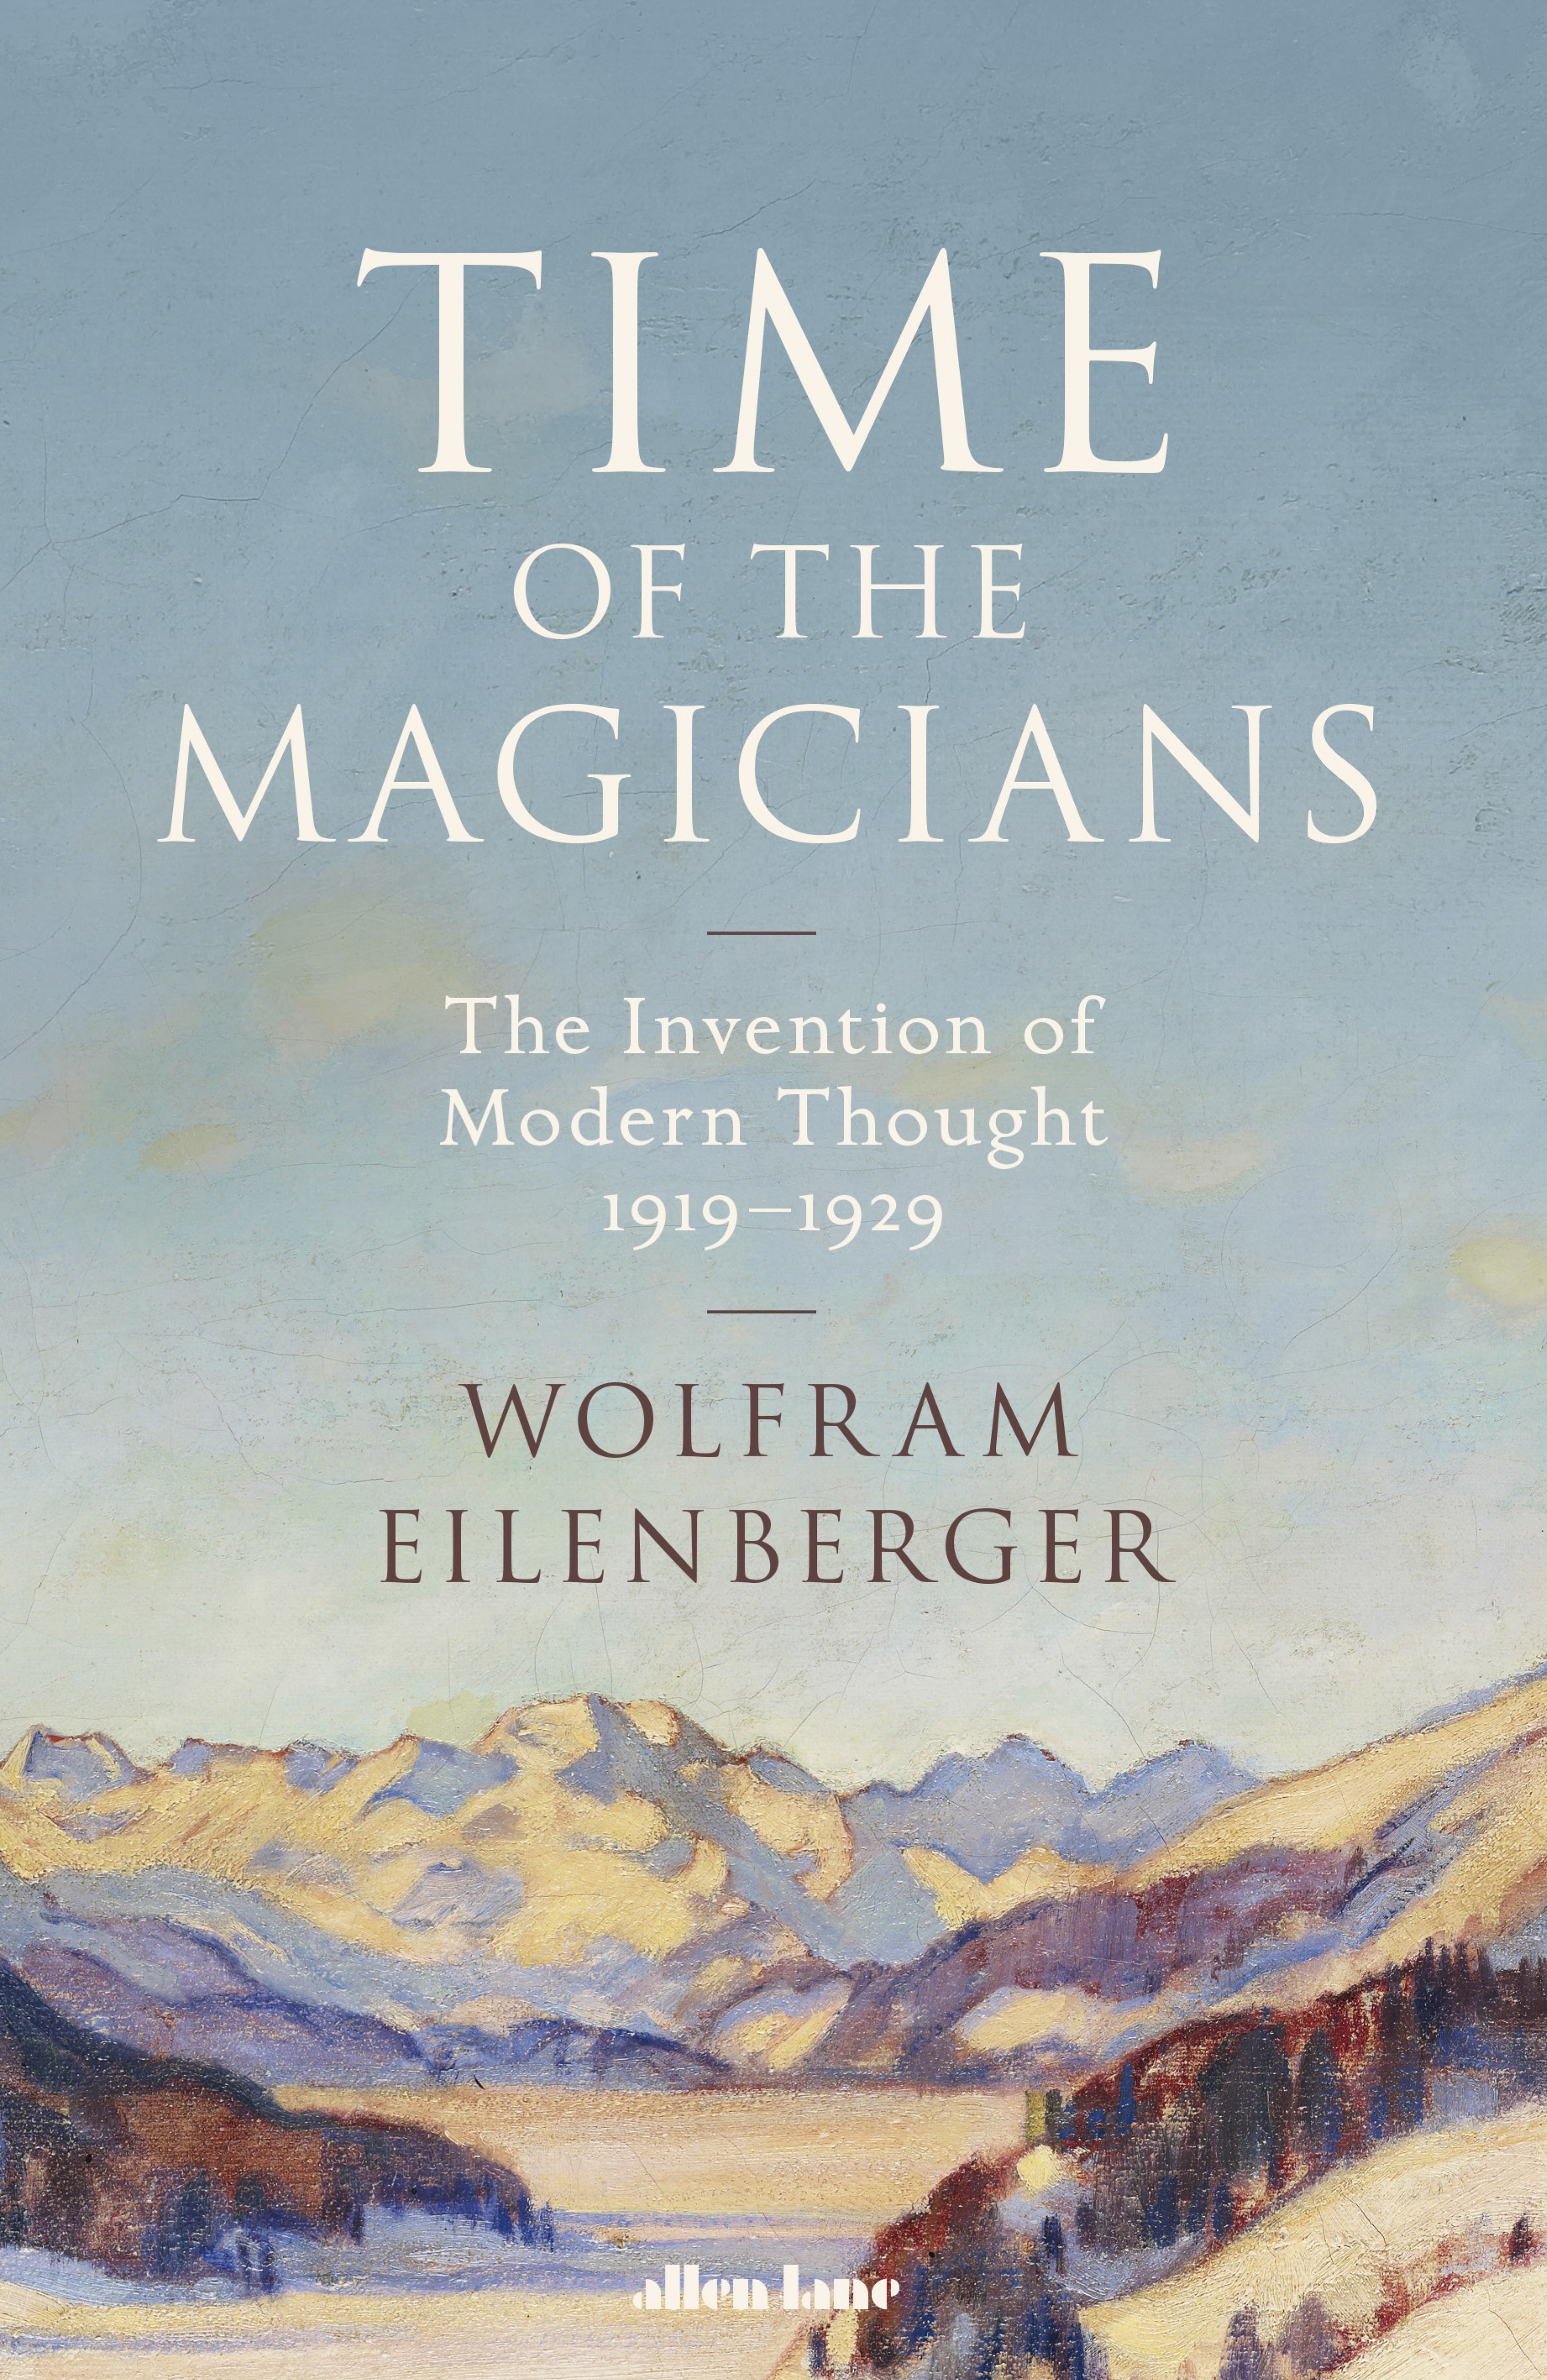 Book “Time of the Magicians” by Wolfram Eilenberger — August 18, 2020